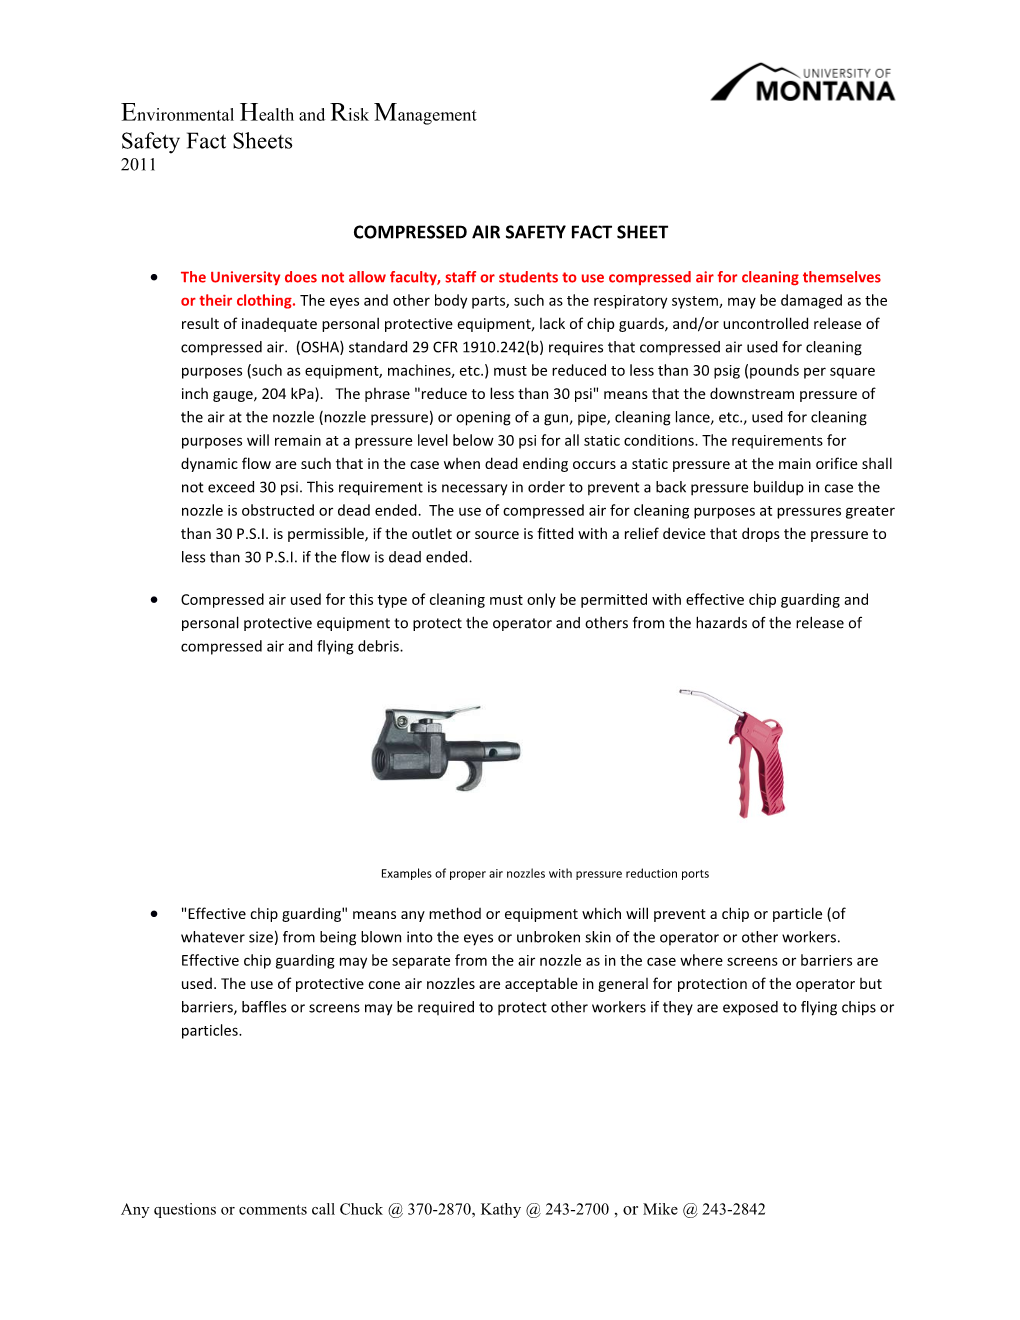 Compressed Air Safety Fact Sheet